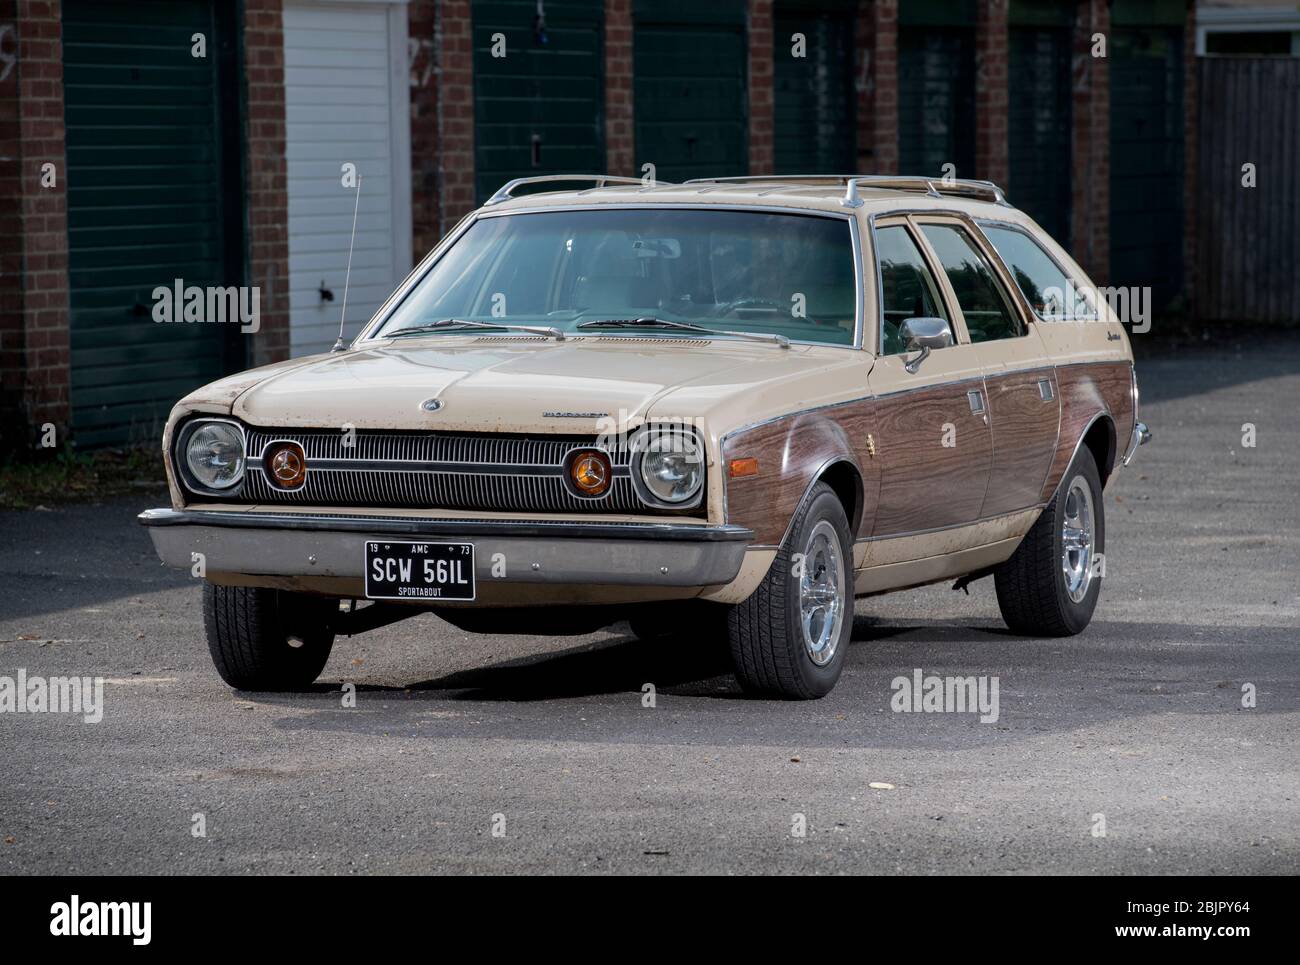 1973 AMC Hornet 'Gucci' special edition classic American station wagon car Stock Photo